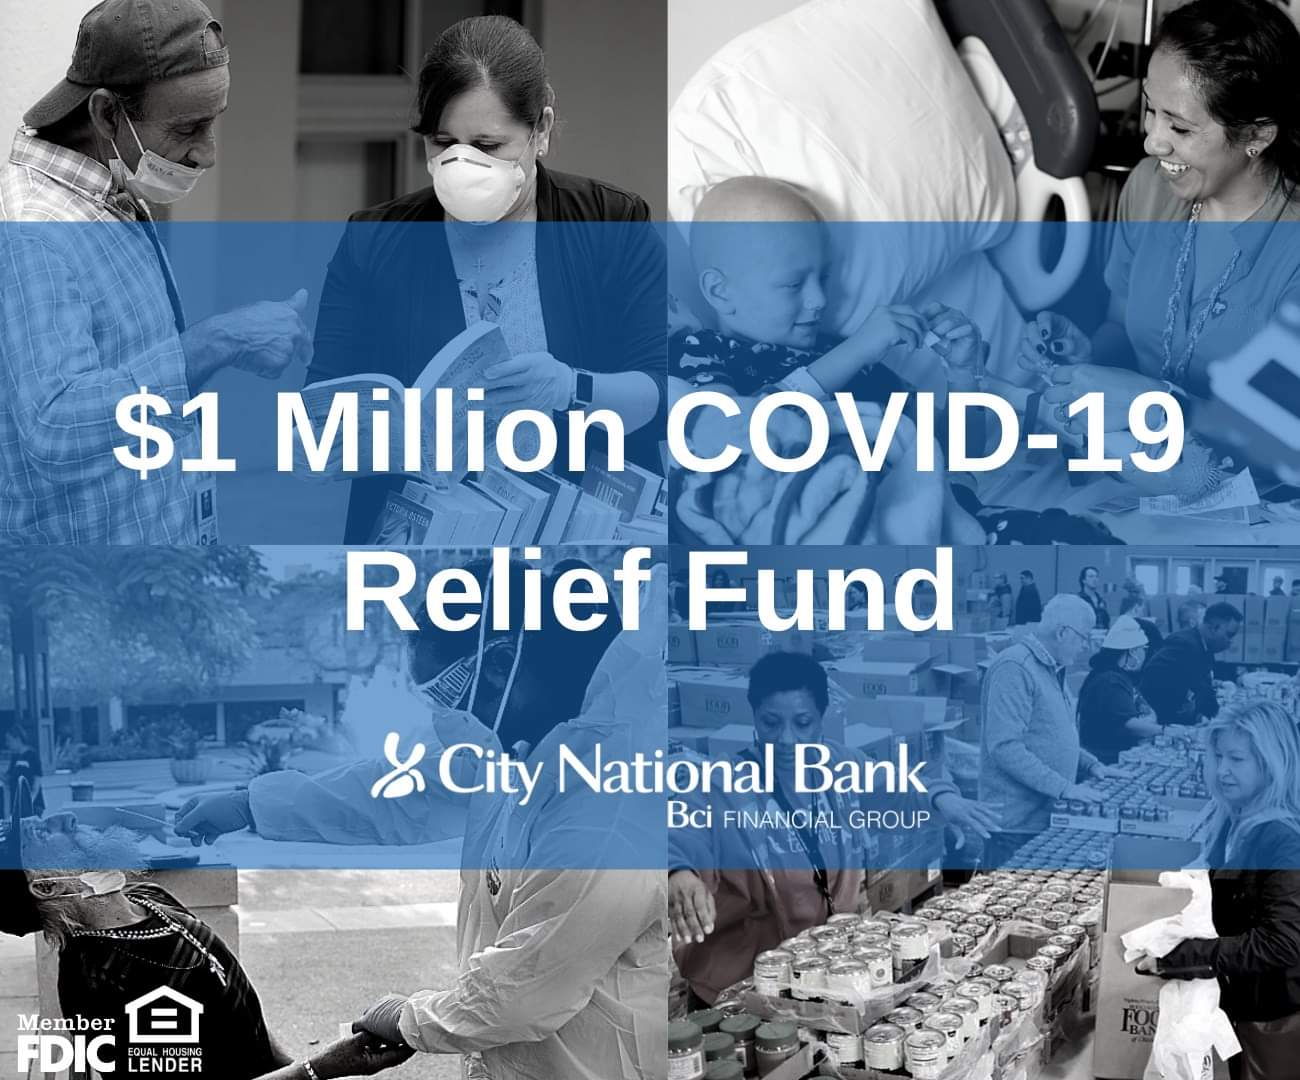 City National Bank Commits $1 Million To Florida Nonprofits Supporting Covid-19 Relief Efforts  